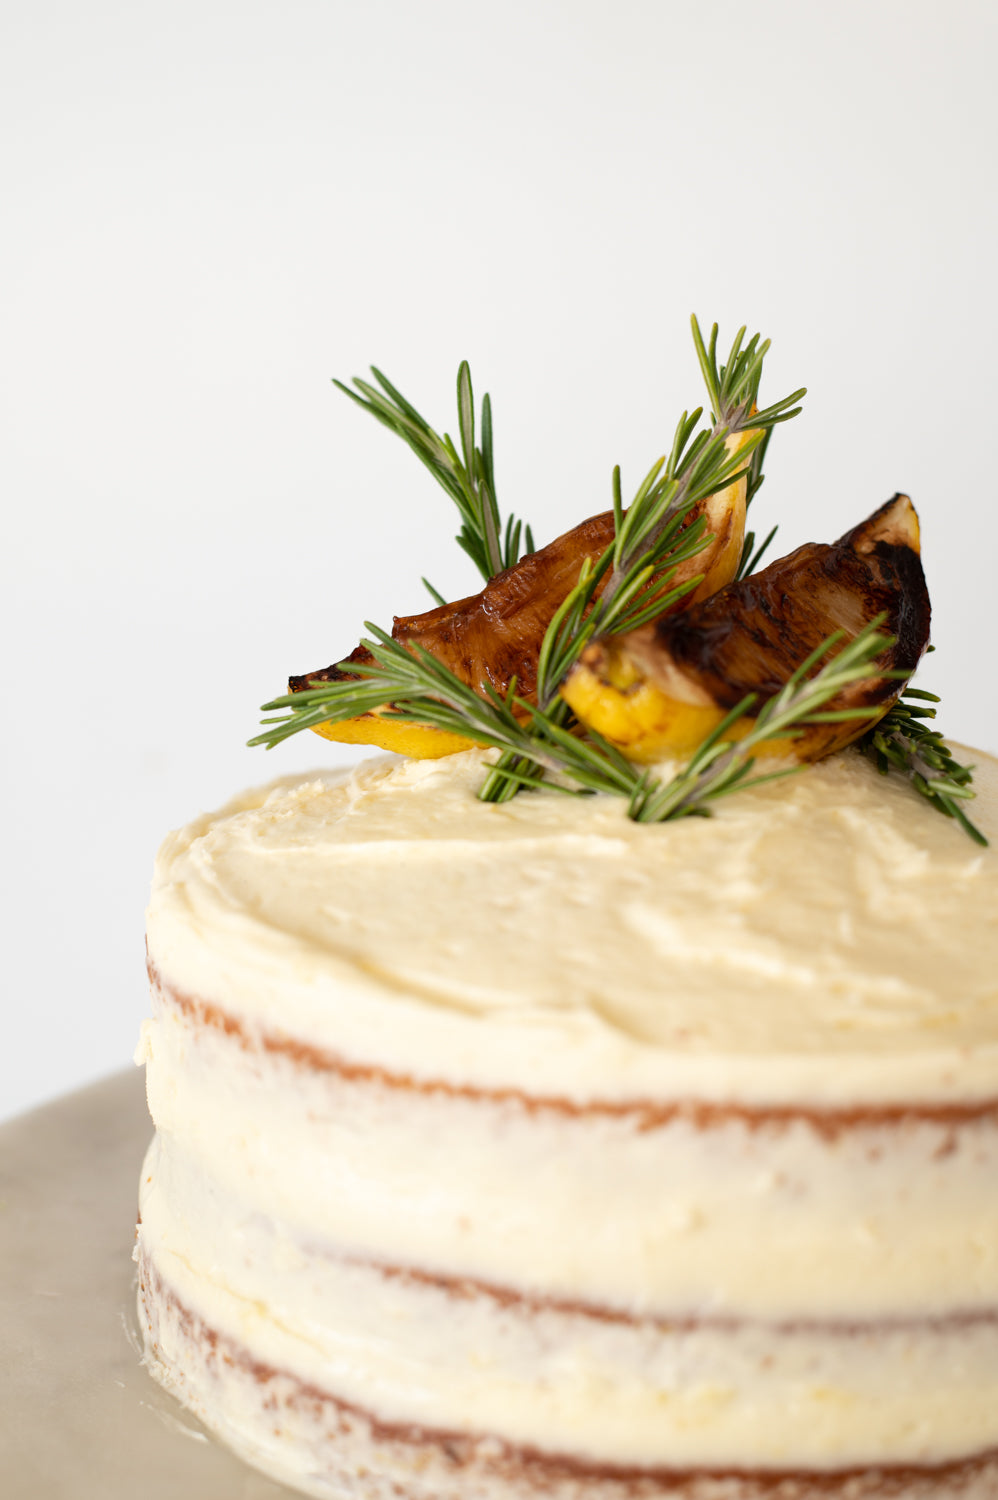 Three layered lemon, olive oil and rosemary cake covered in cream cheese icing, topped with lemon and rosemary garnish